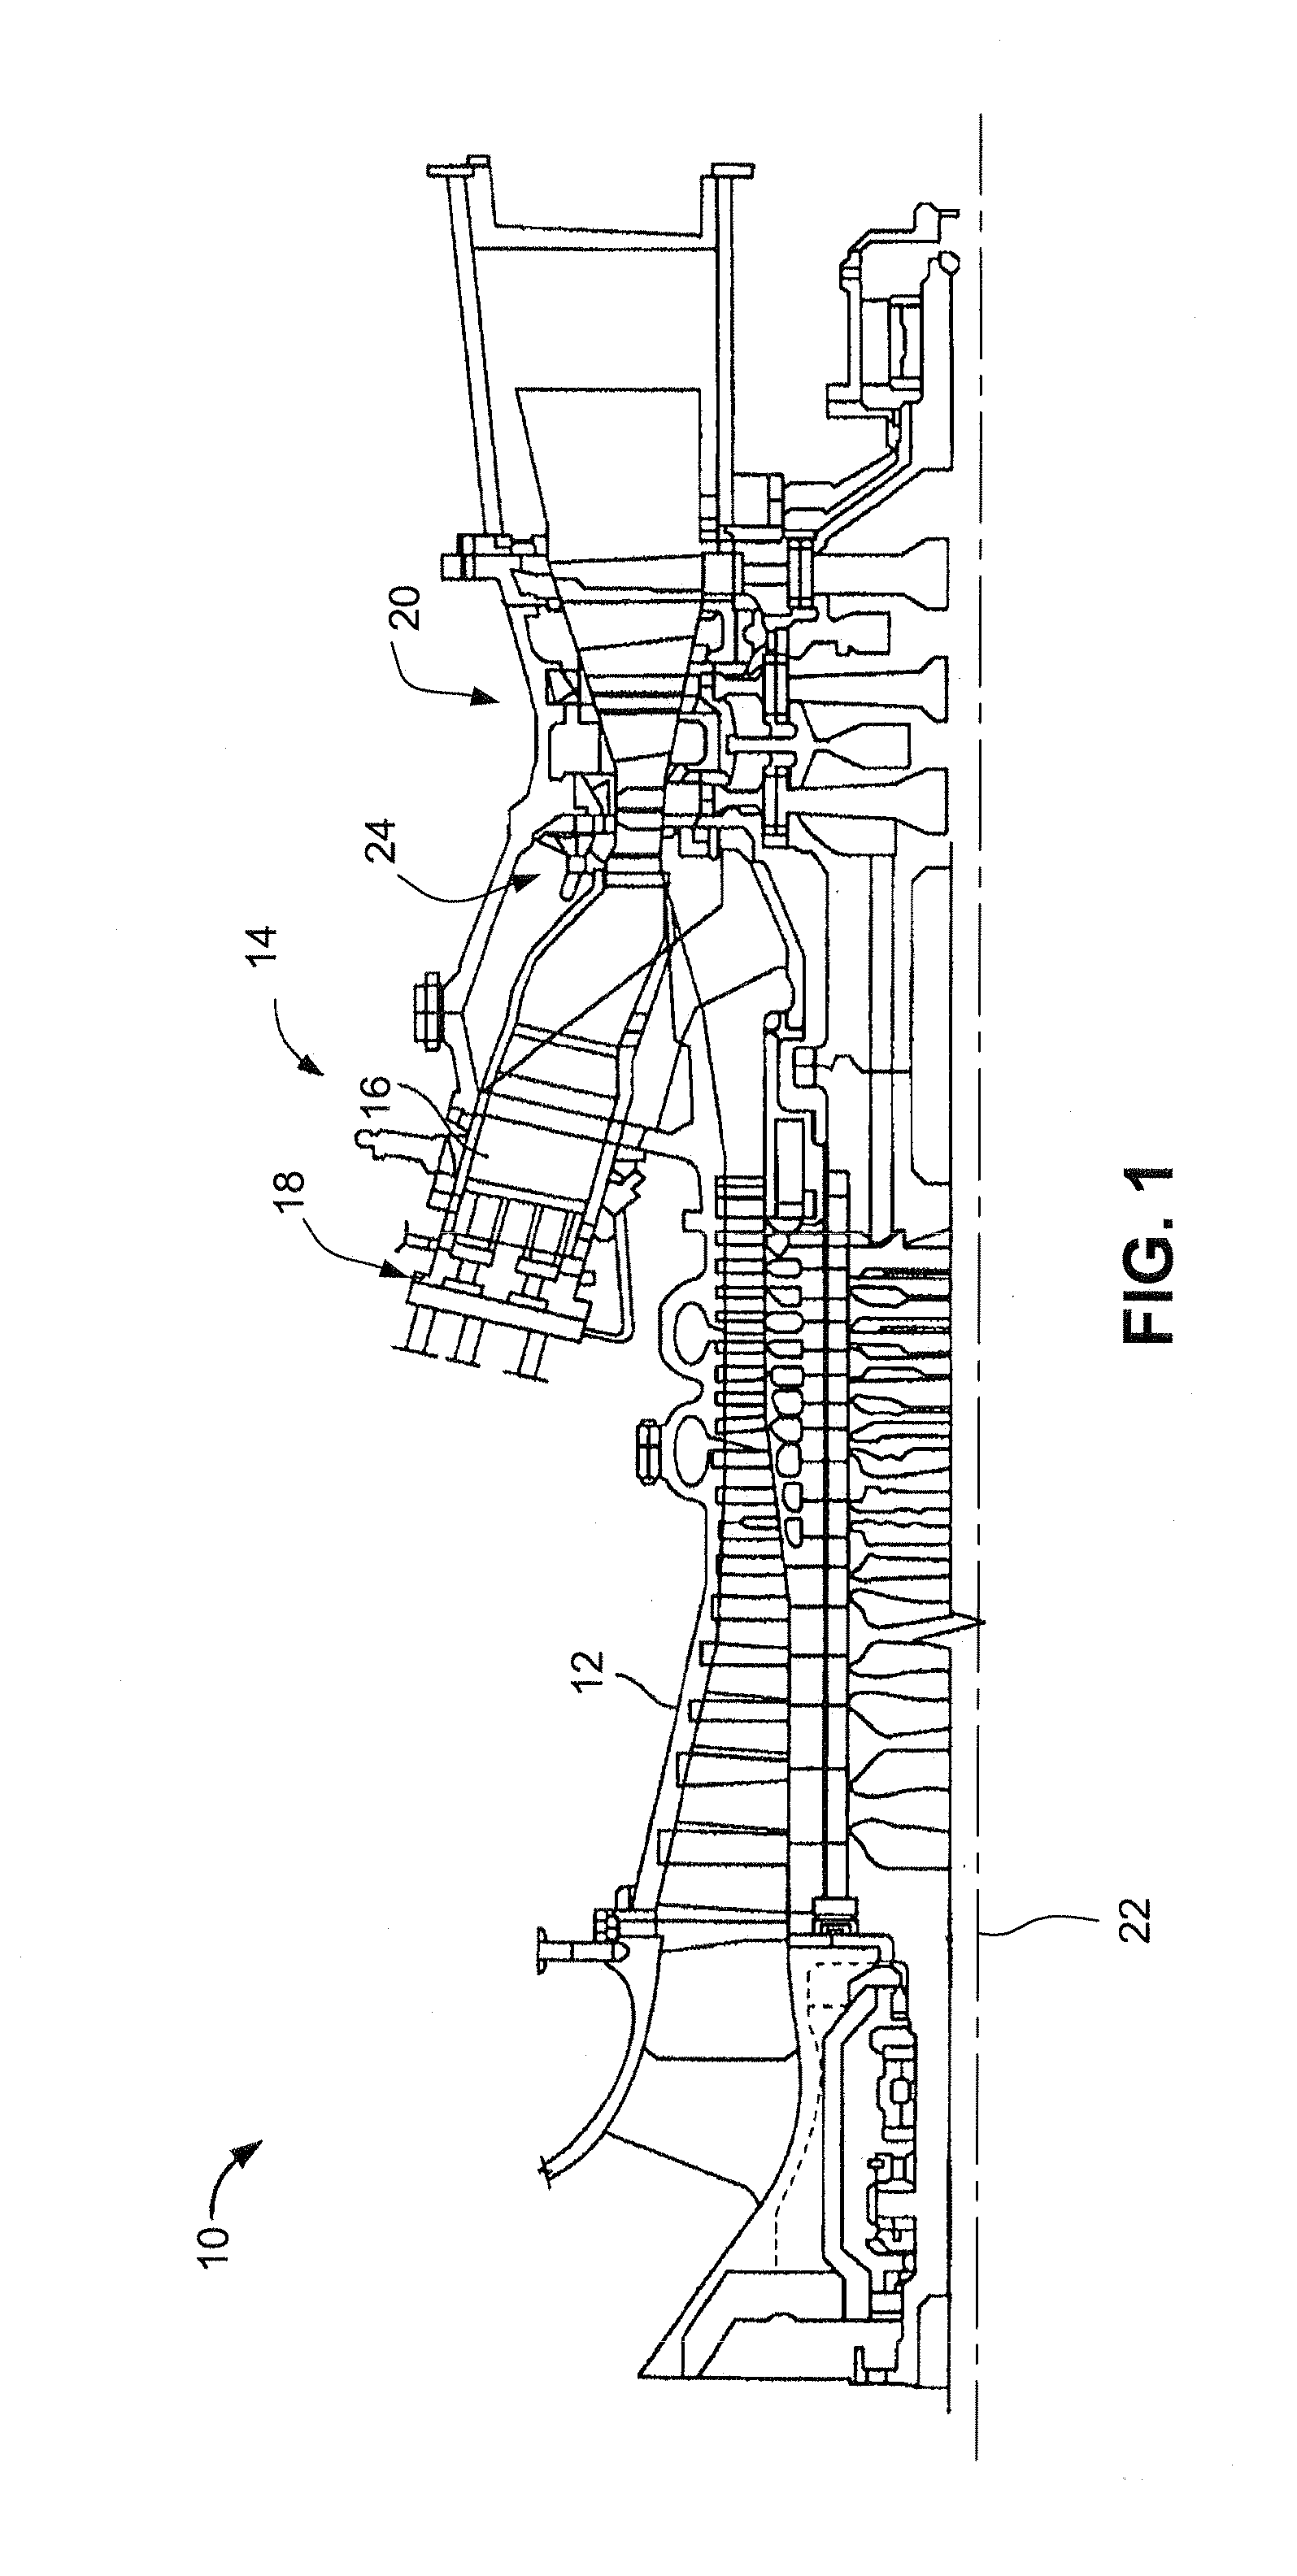 Gas turbine combustor endcover assembly with integrated flow restrictor and manifold seal